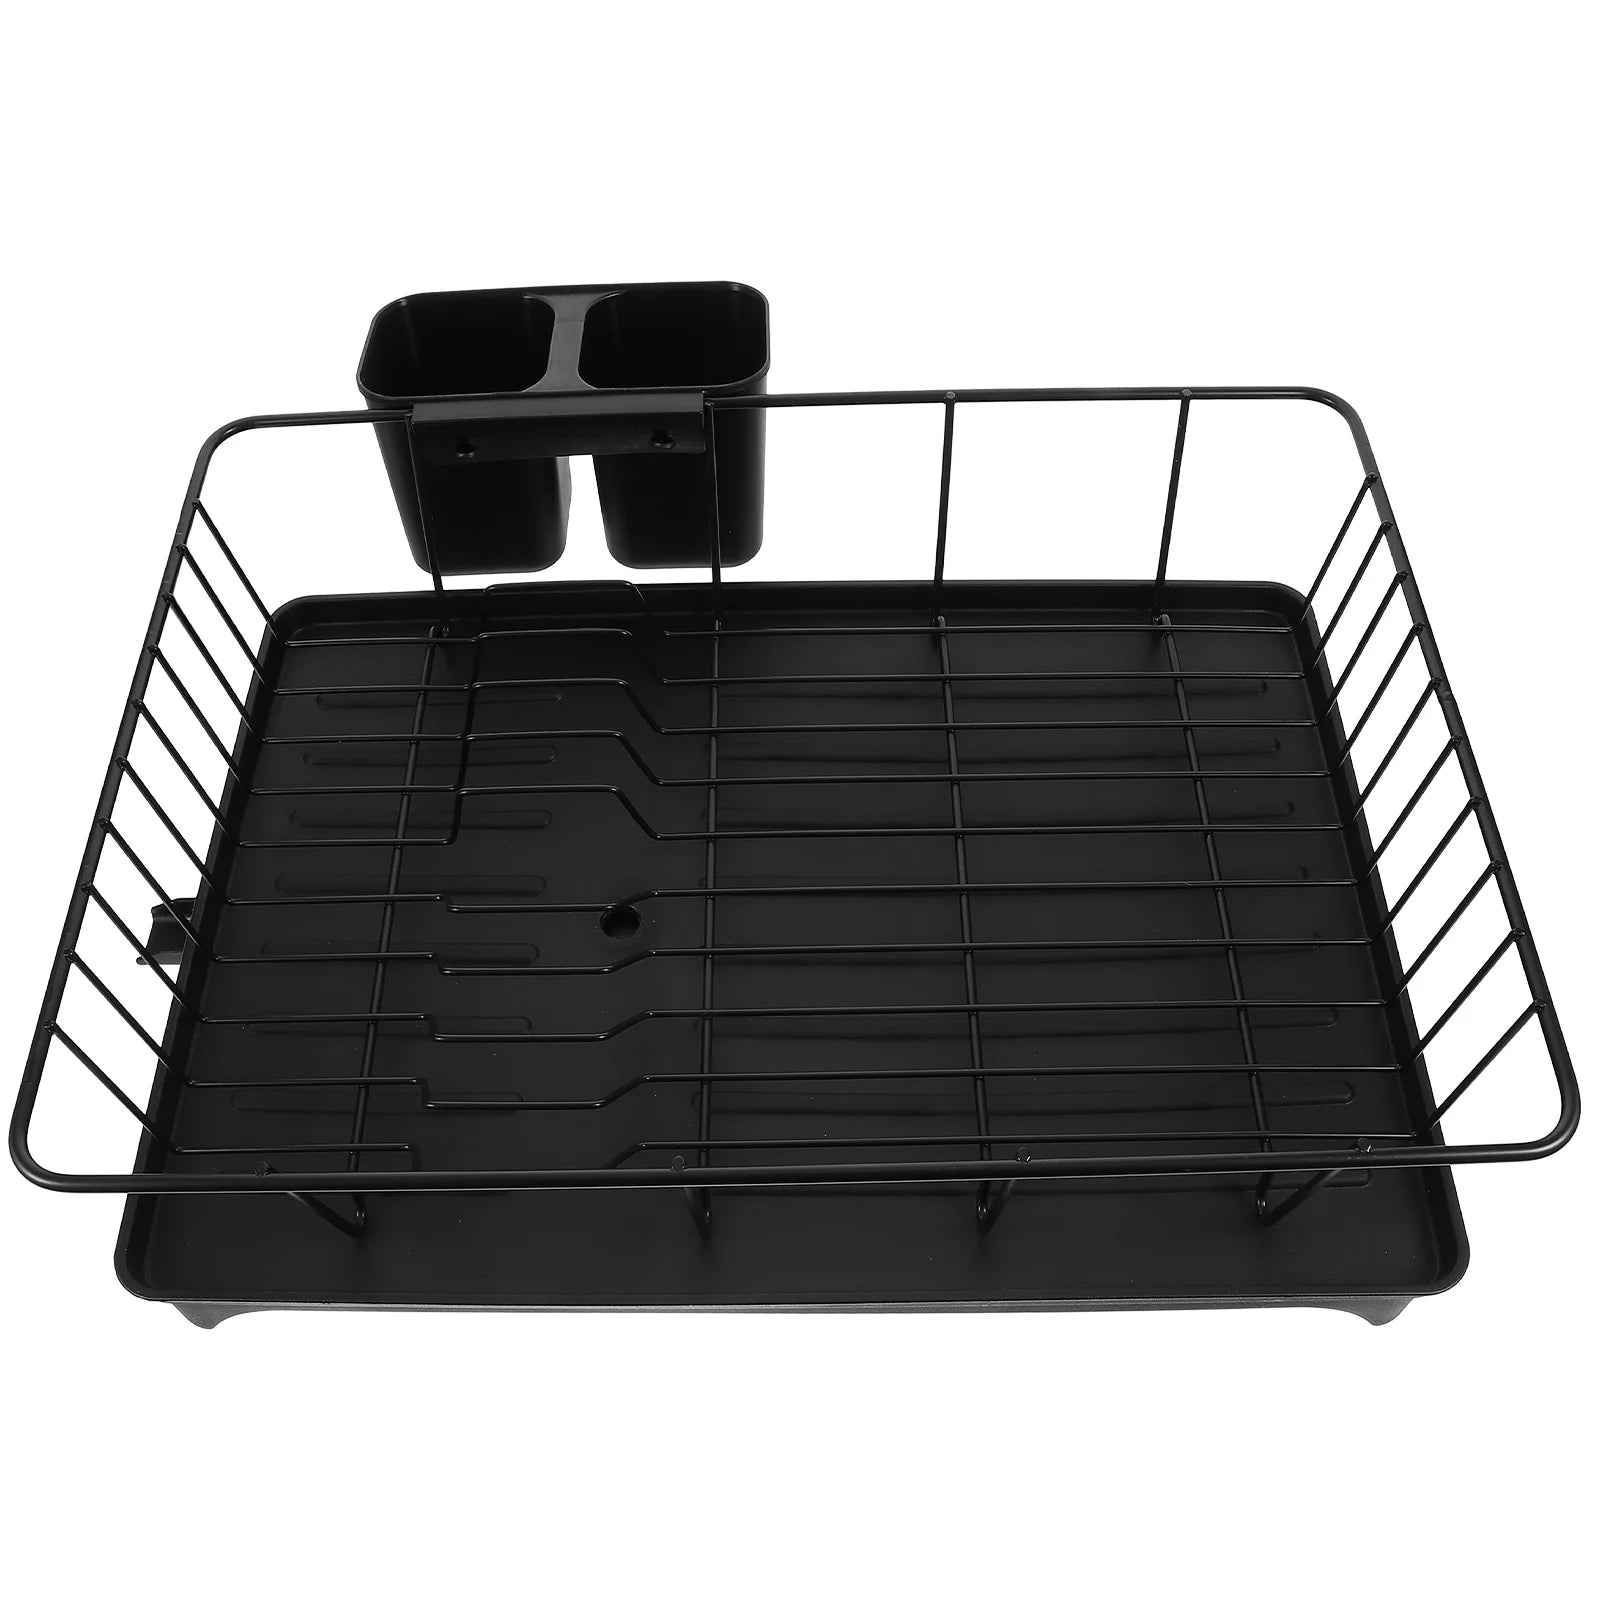 Clothes Drying Rack Dish Strainers Kitchen Counter Dishes Metal Pp Drainer Racks